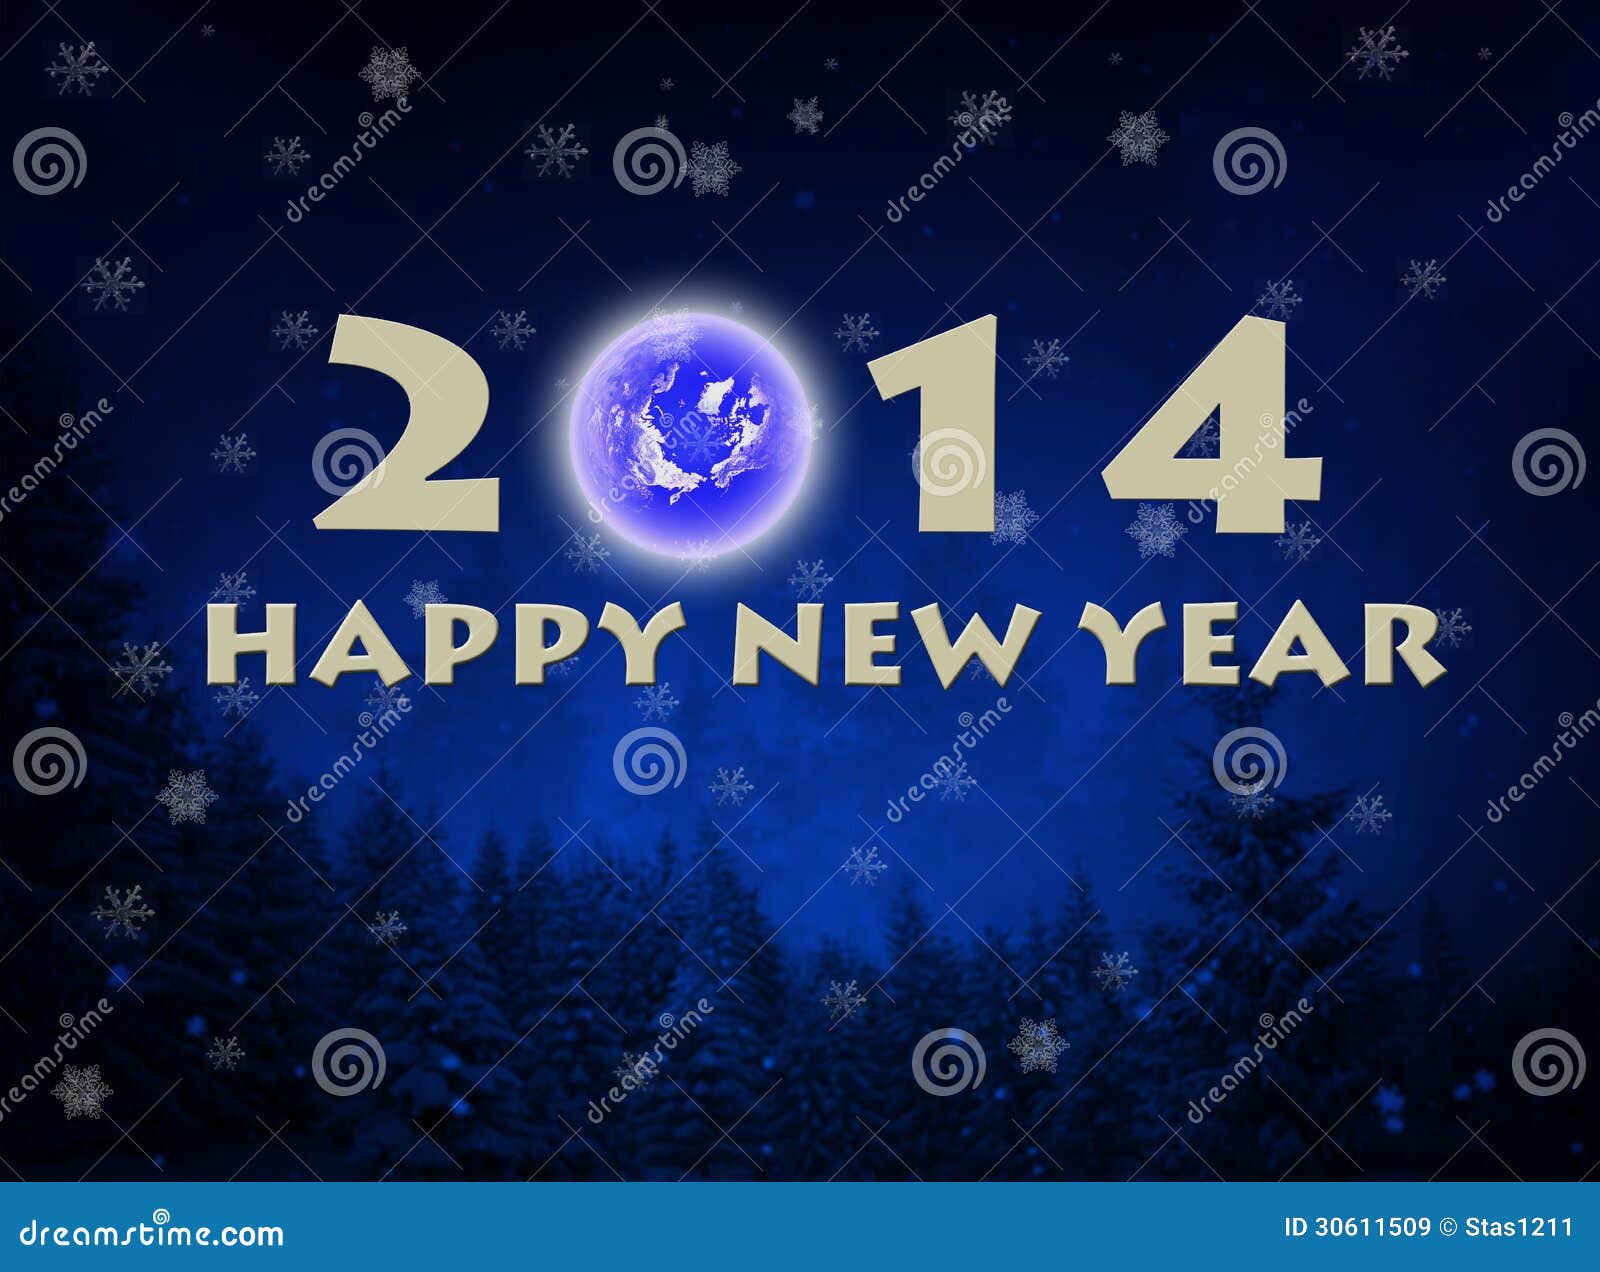 free animated clipart happy new year 2014 - photo #36